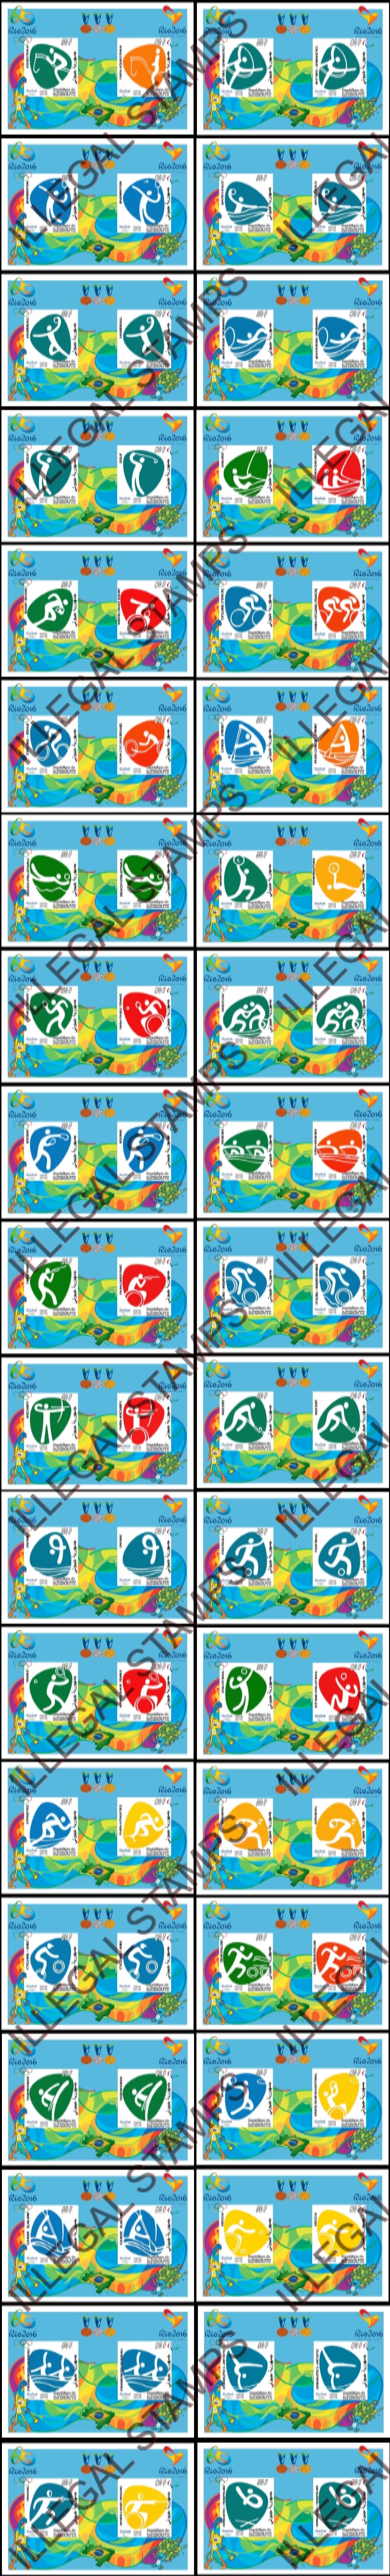 Djibouti 2016 Paralympic Games Illegal Stamp Souvenir Sheets of 2